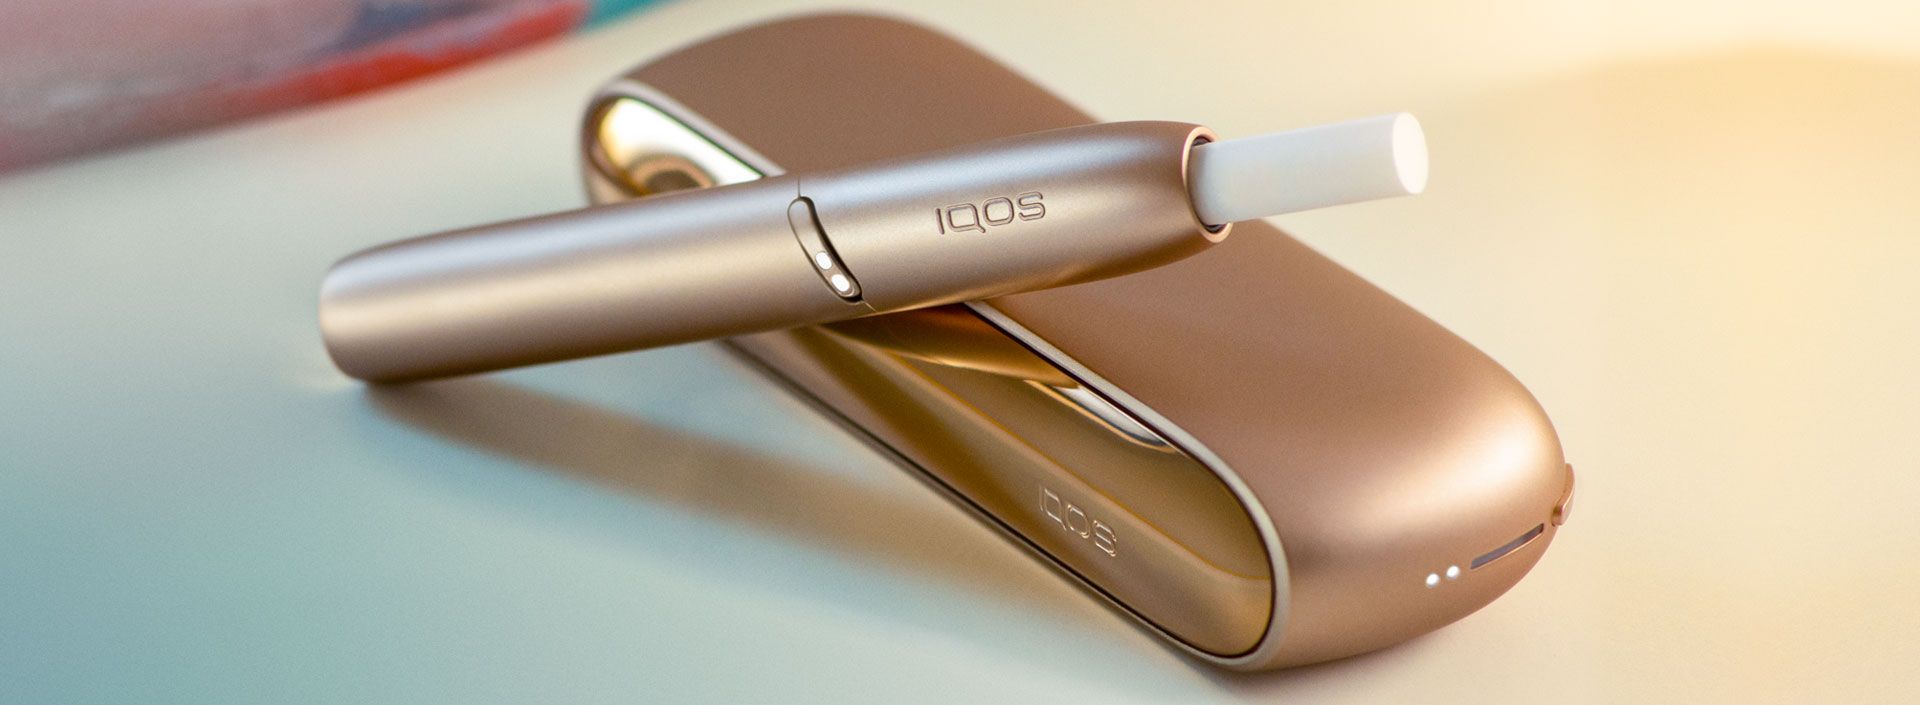 IQOS 3 DUO in Brilliant Gold and HEETS